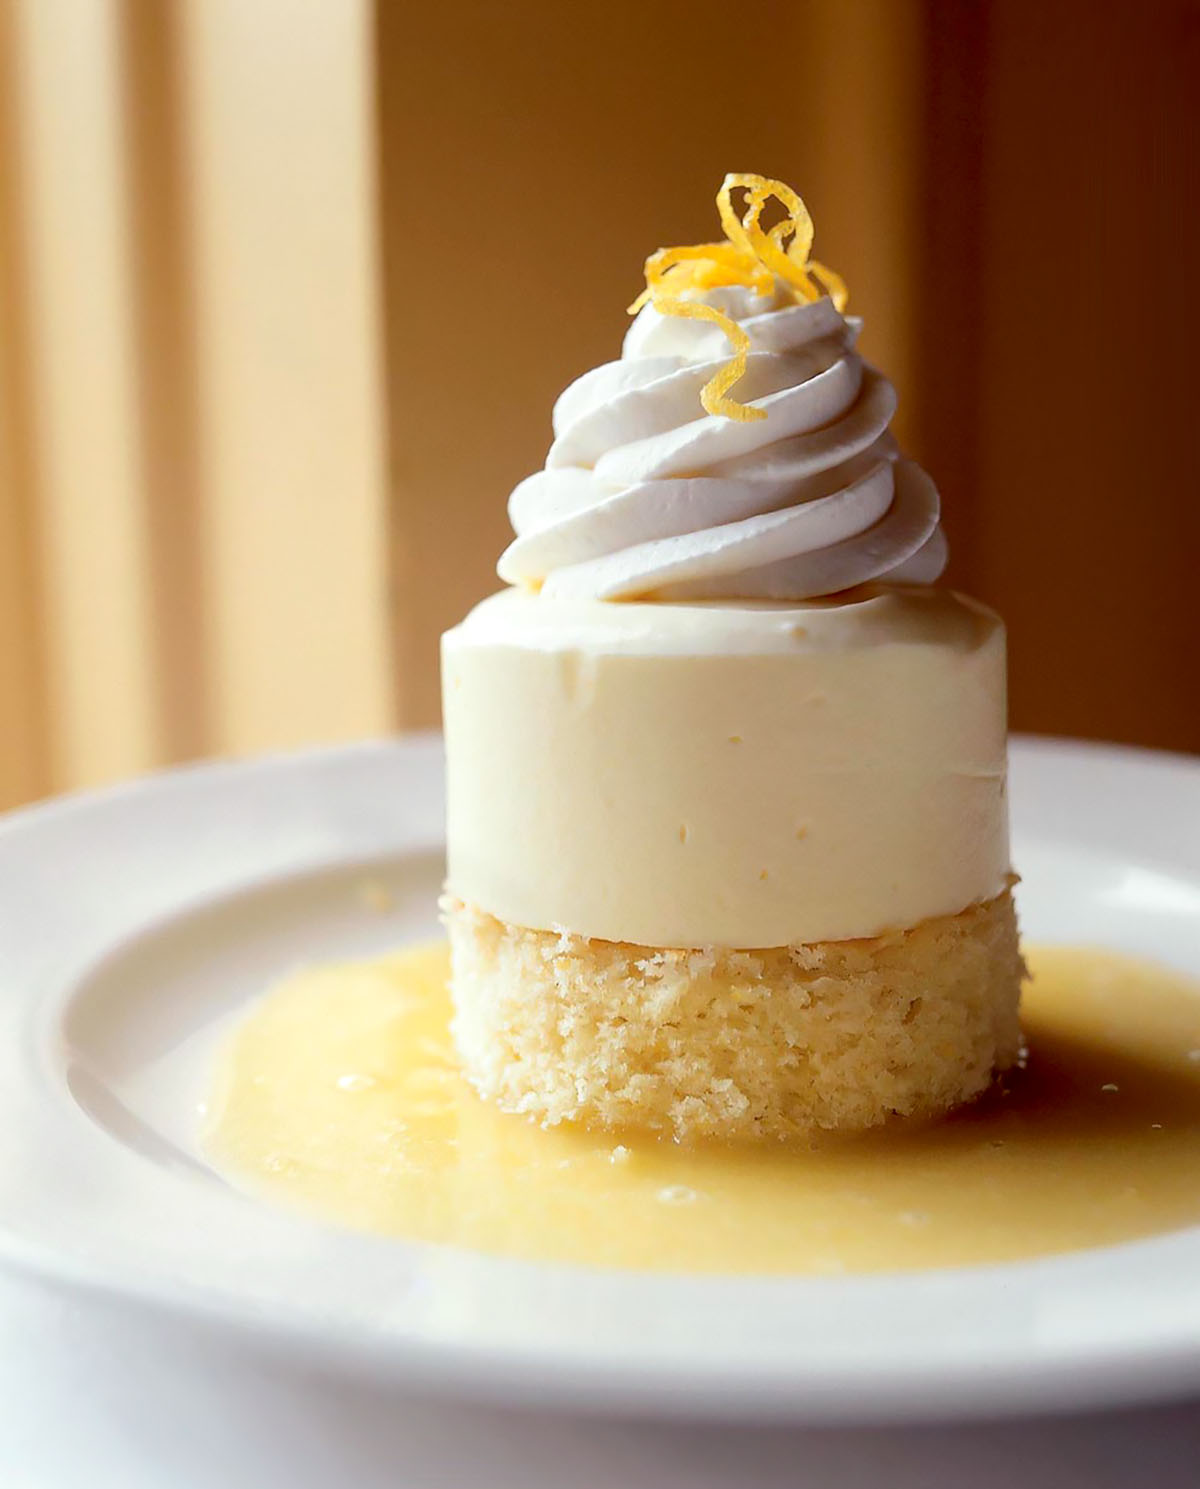 Lemon semifreddo in a pool of lemon sauce and garnished with a twist of lemon, sitting on a white dessert plate.